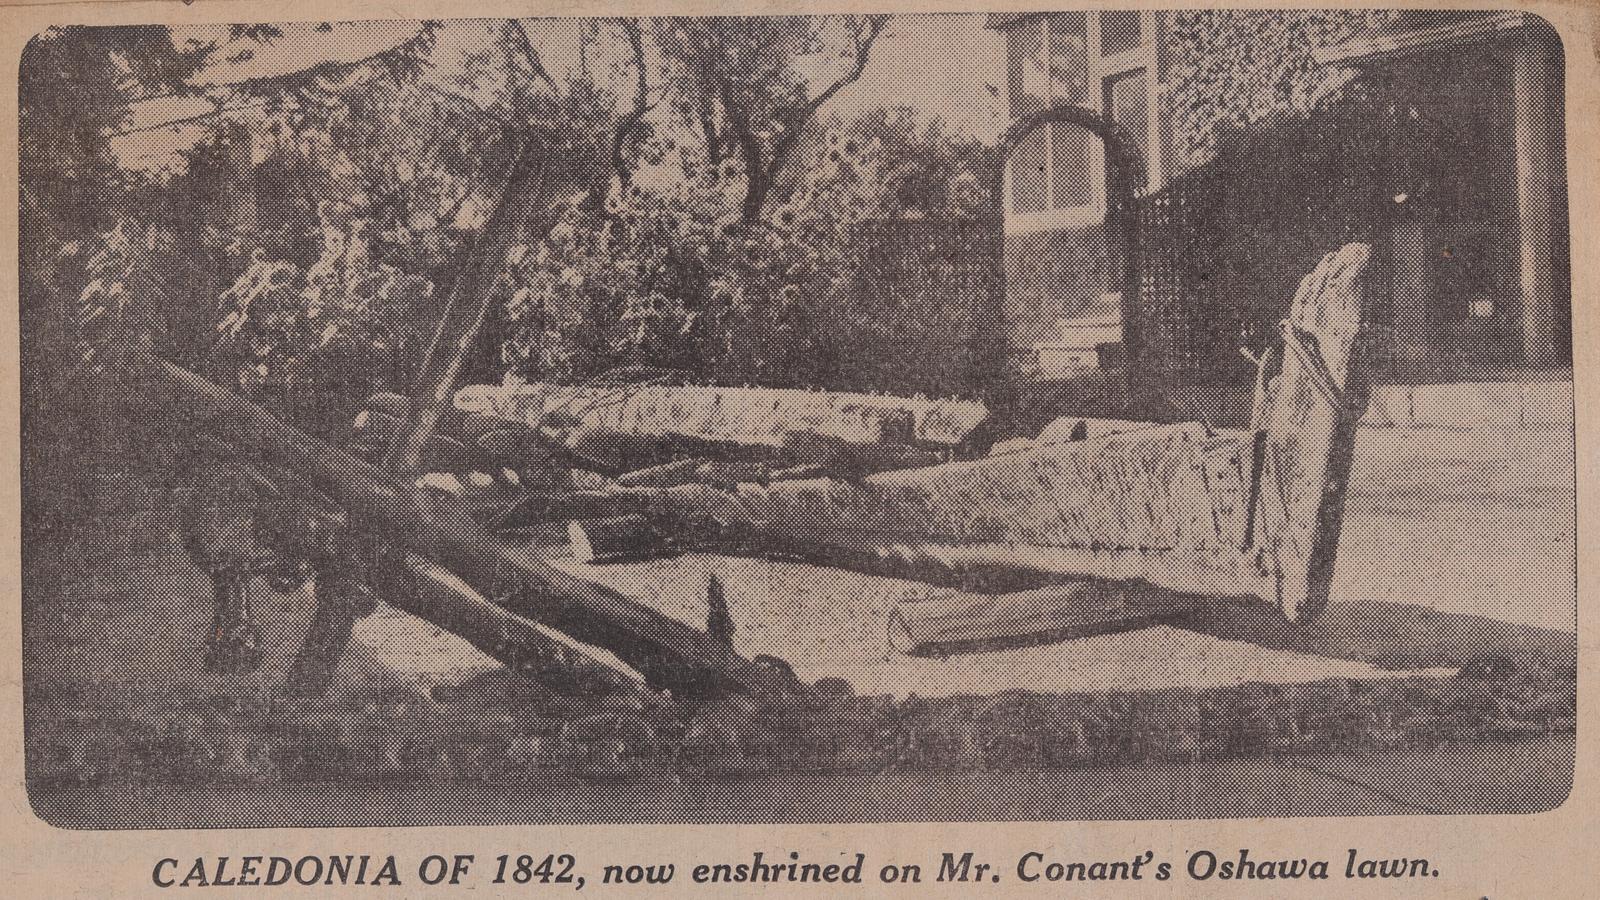 Newspaper clipping showing parts of a schooner on the lawn in front of a house.